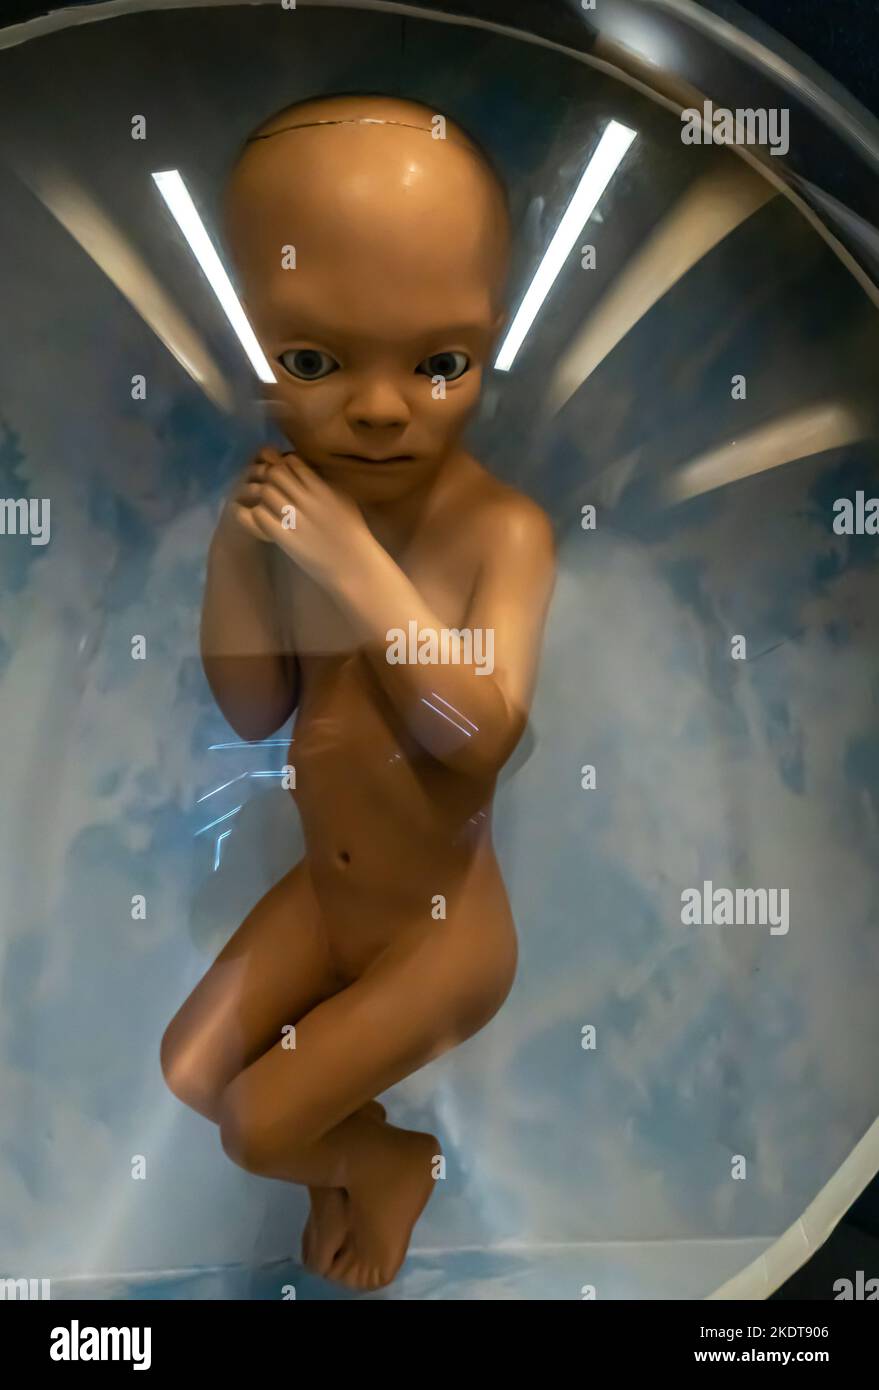 2001: A Space Odyssey (1968). The Star Child model. Stock Photo